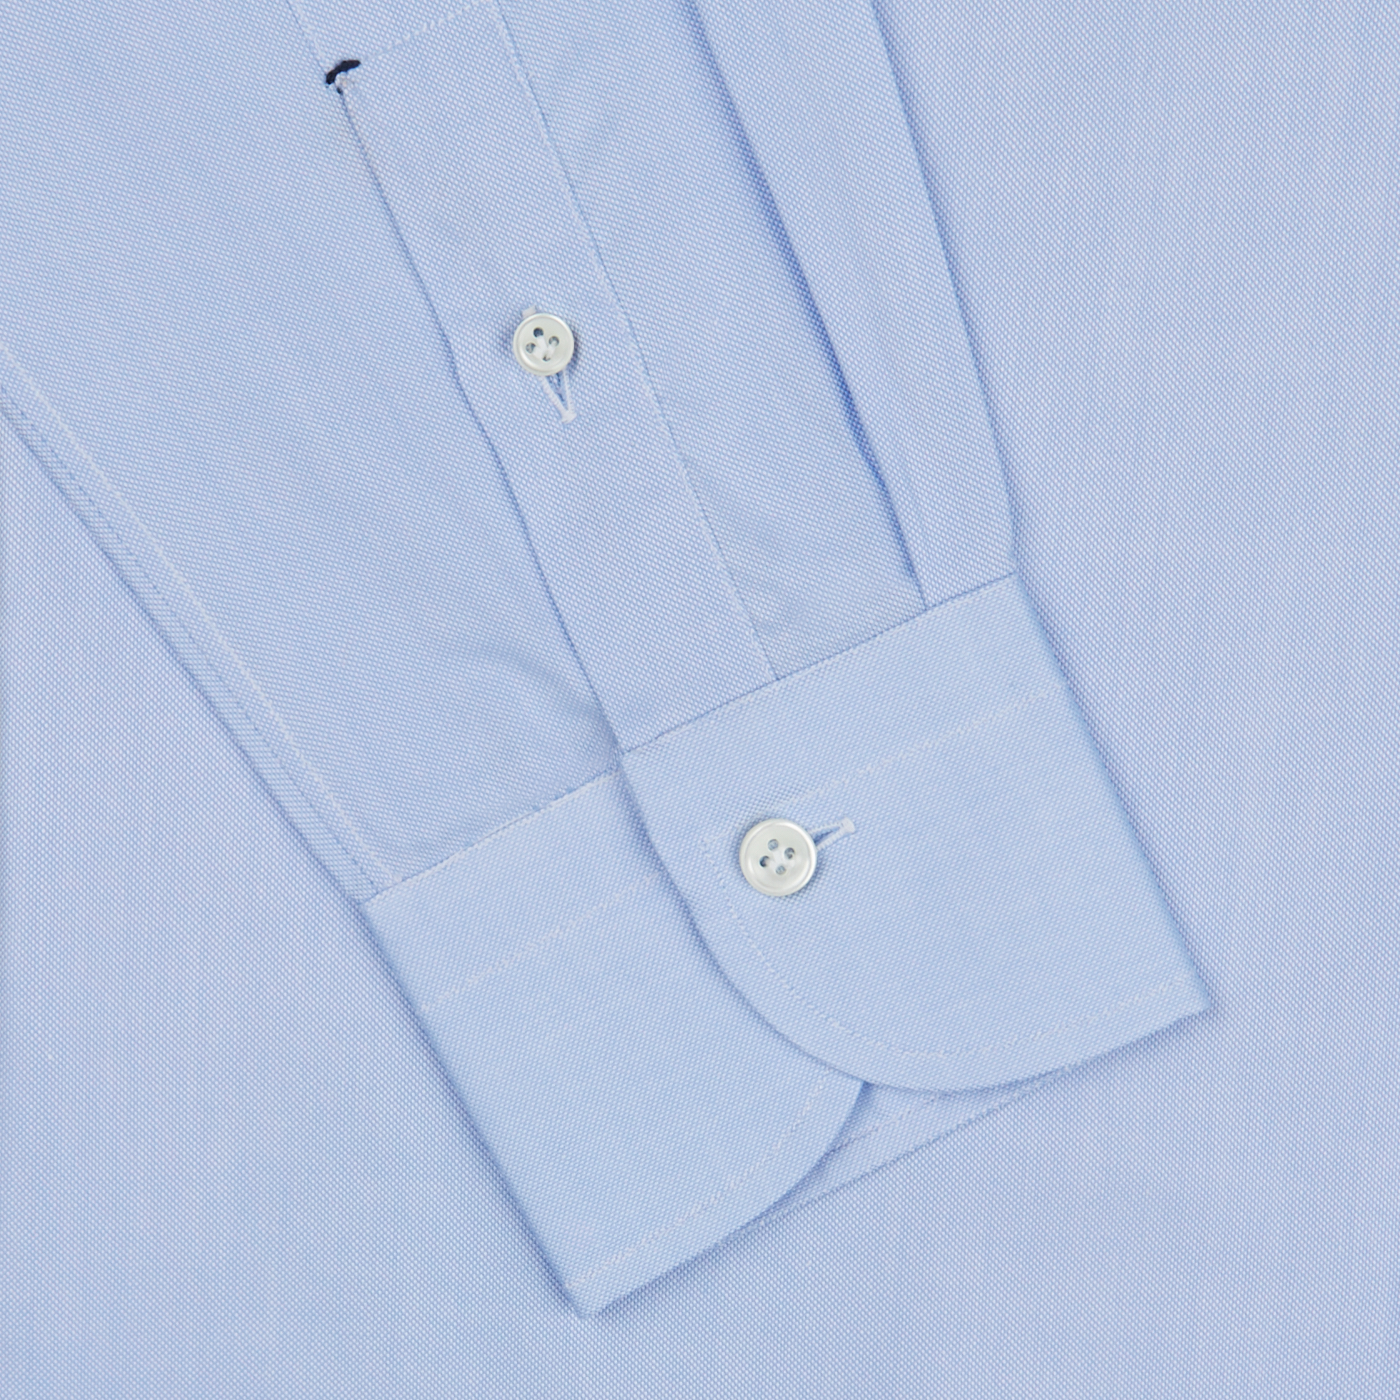 Close-up view of a Mazzarelli light blue royal oxford BD slim shirt showing detail of the cuff with two buttons and placket.